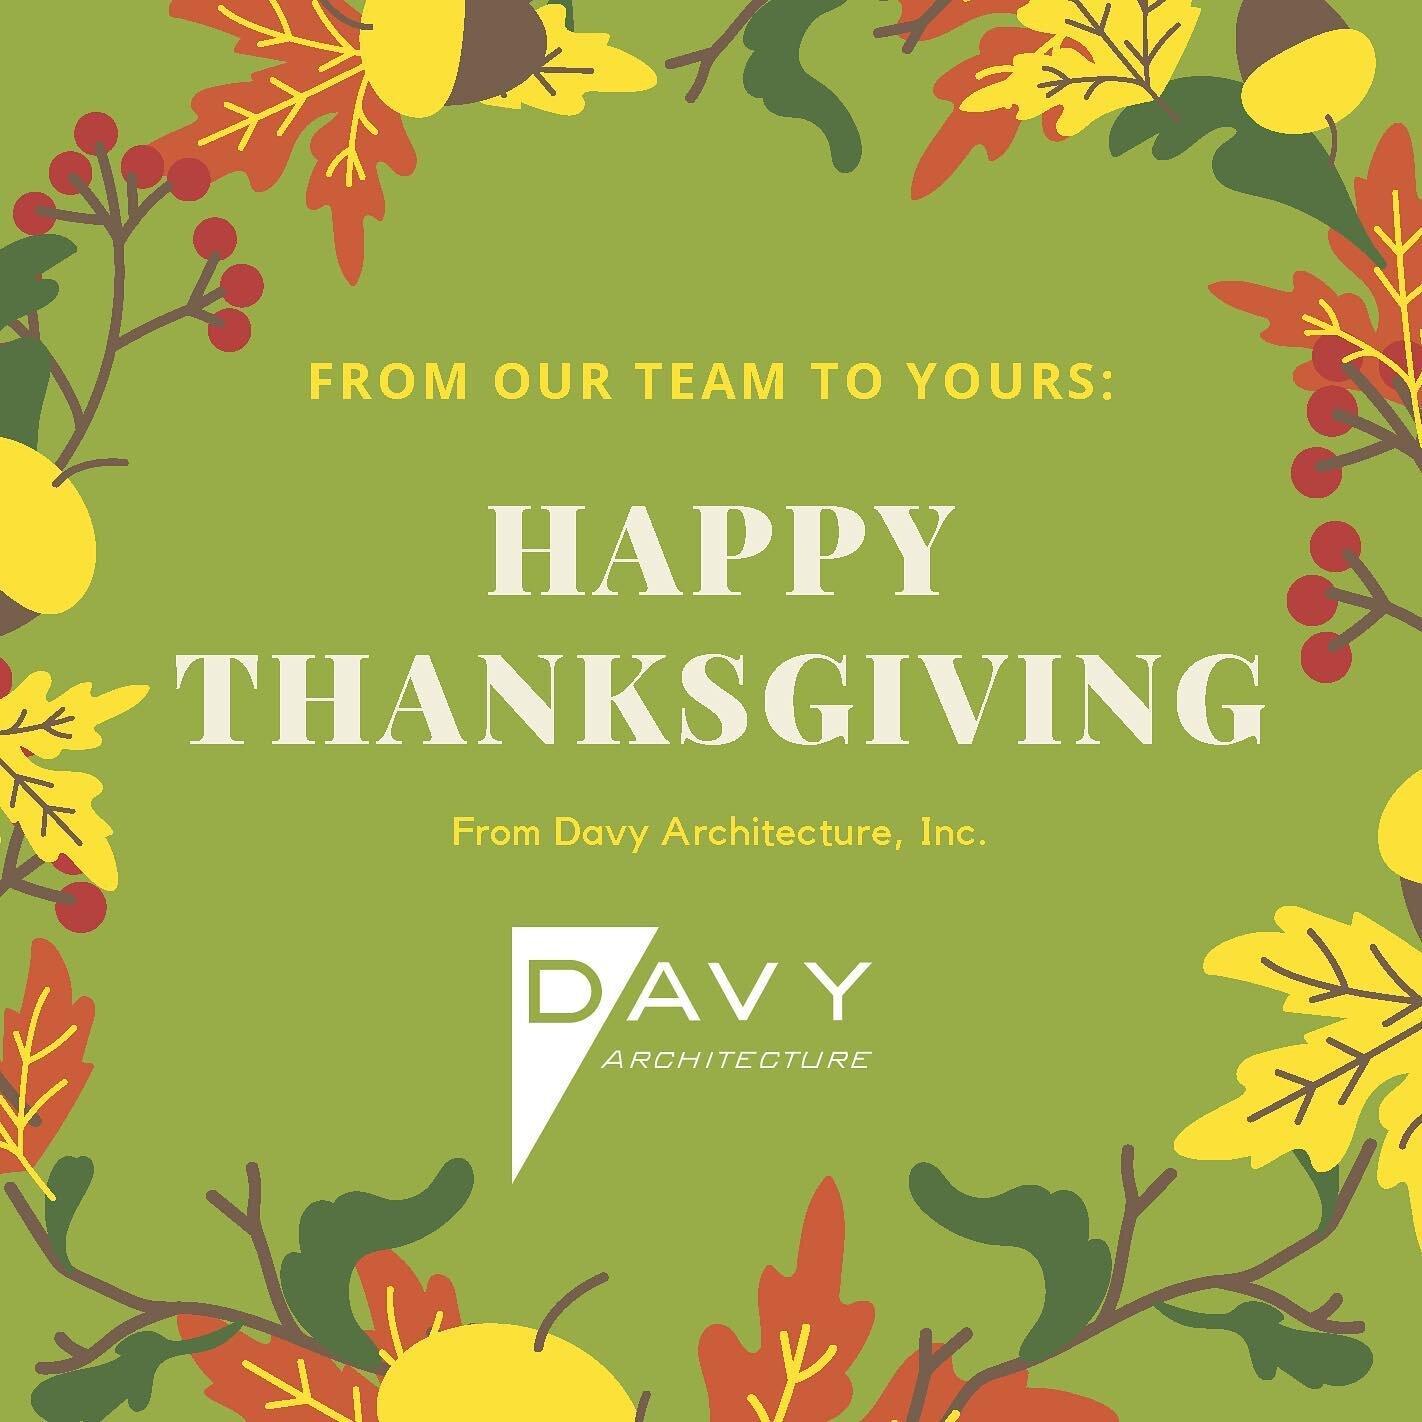 This year, #teamdavy is grateful for an amazing team and the opportunity to work on projects that serve students, patients, Veterans and our community!

Last week we put our &ldquo;pencils down&rdquo; to hold our annual 🍂🍽🍖Thanksgiving potluck 🦃?